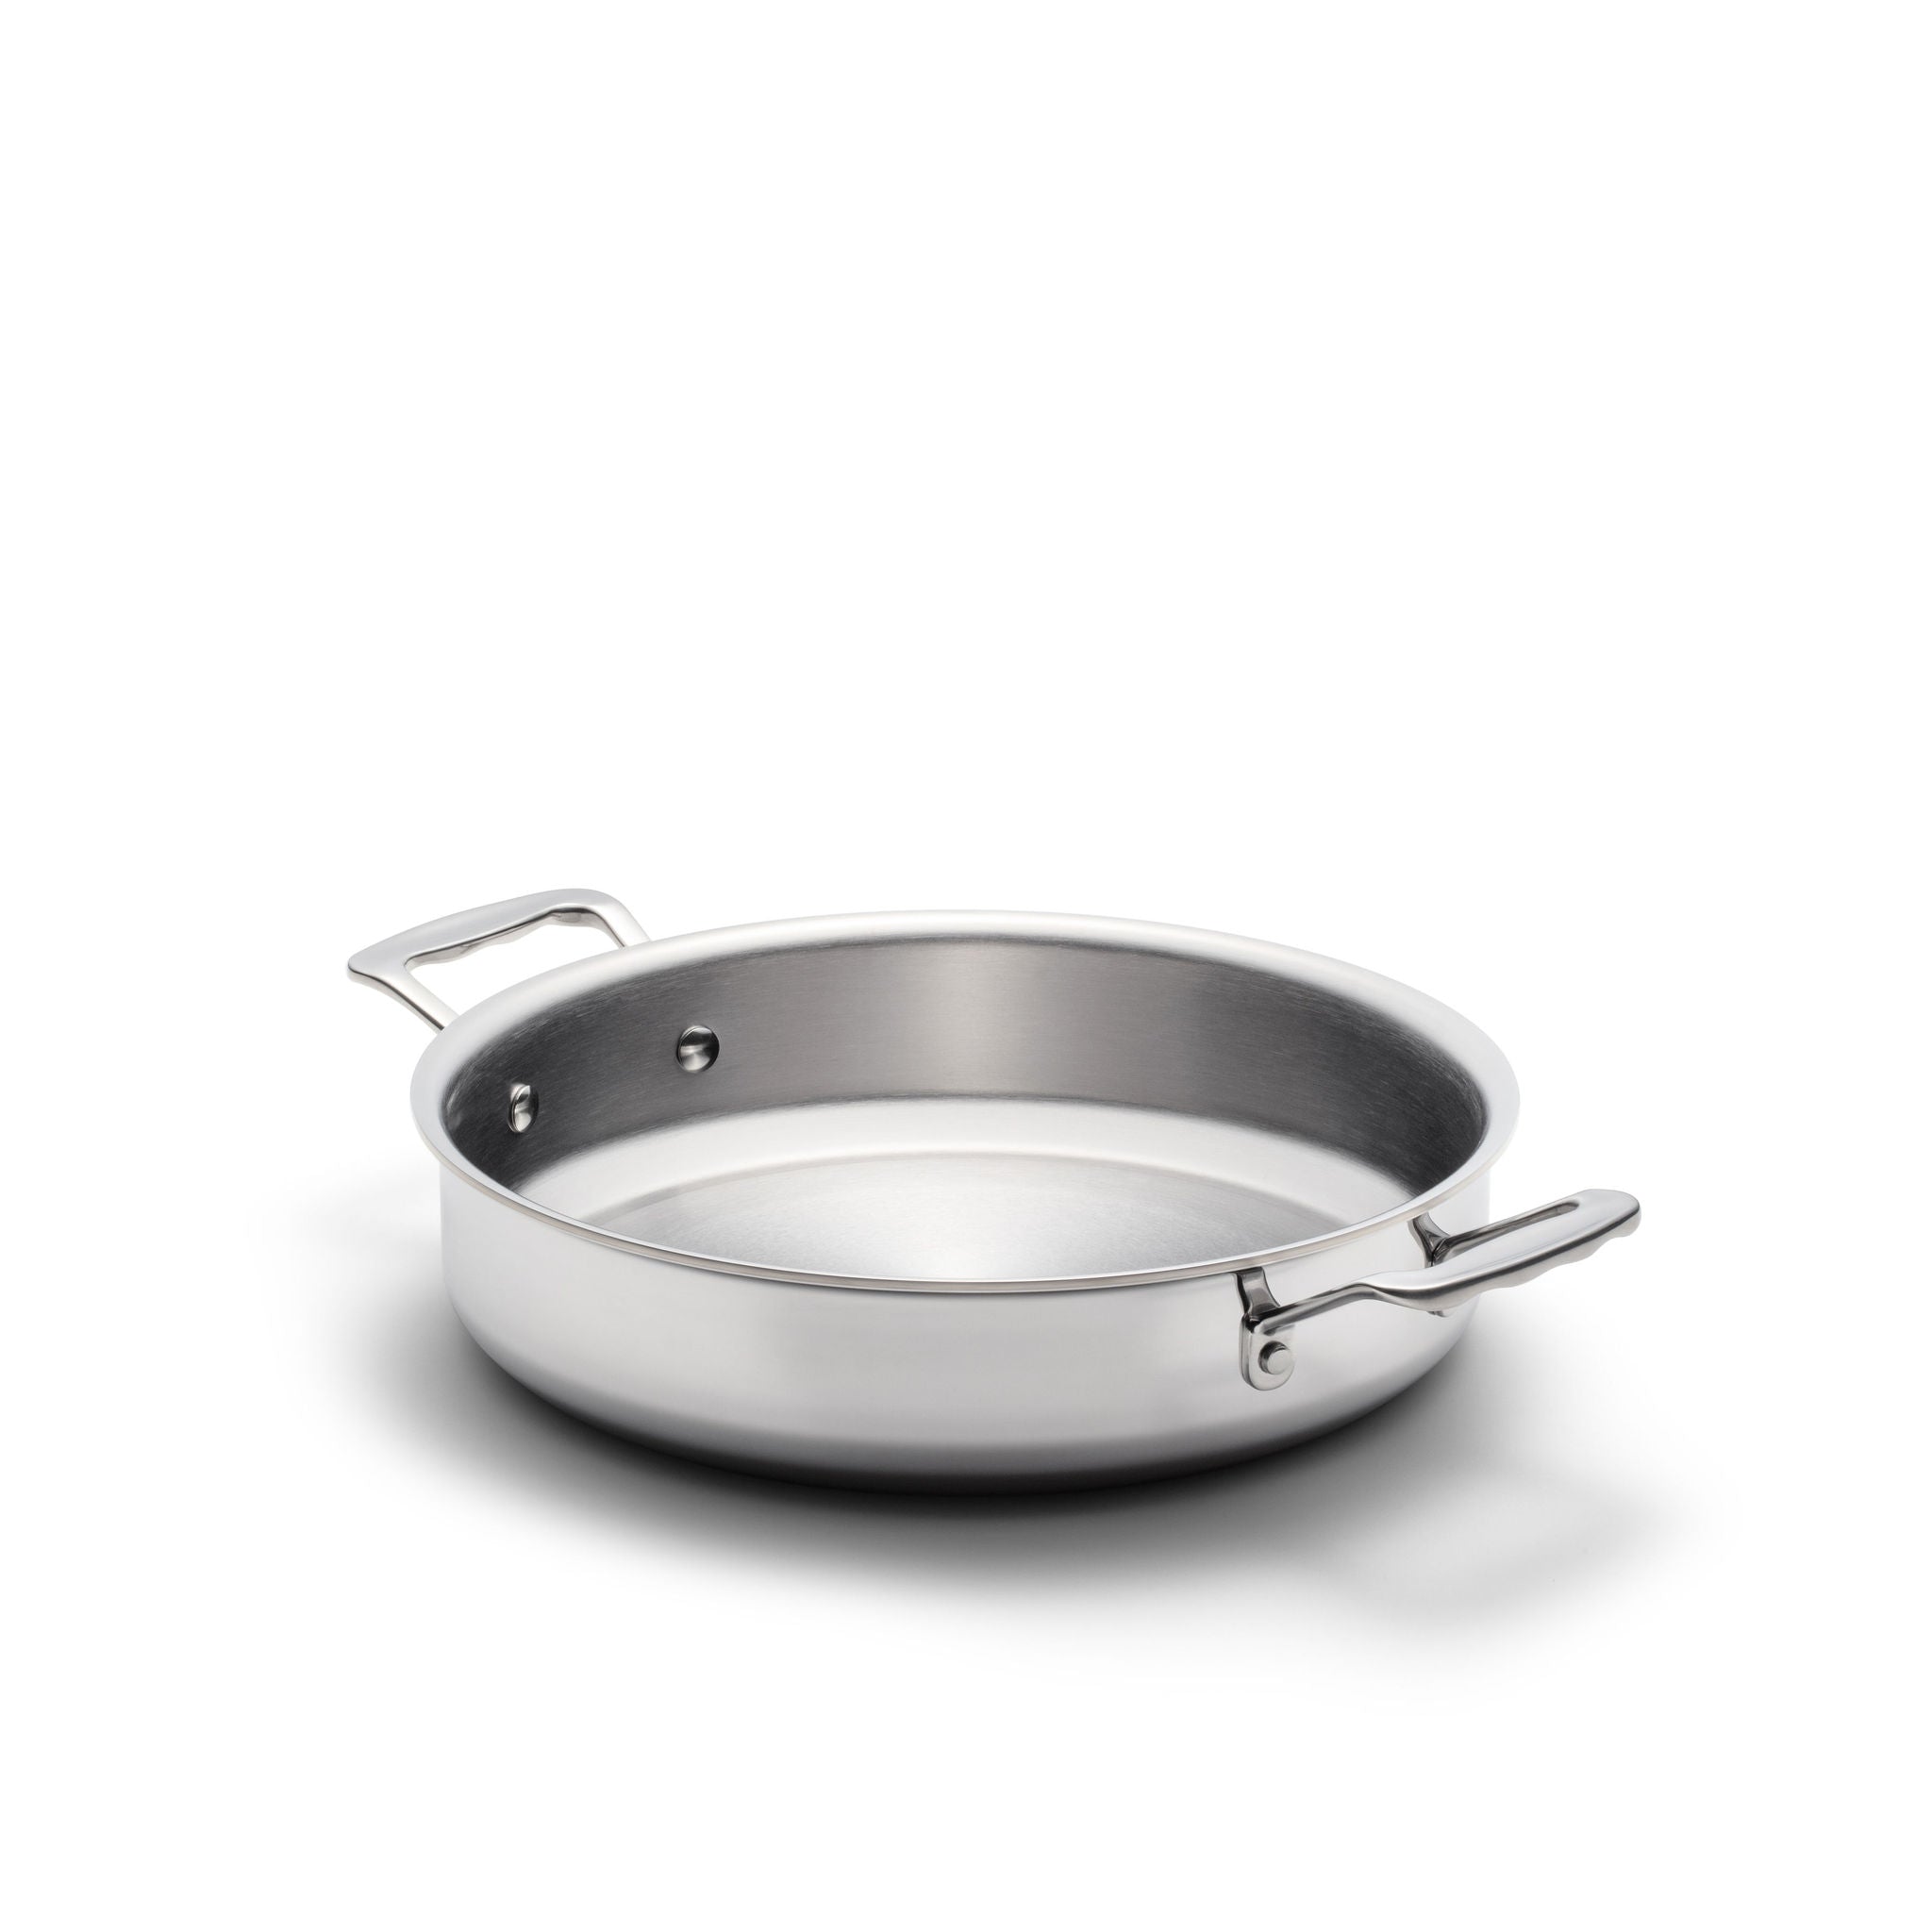 Stainless Steel Sauce Pan Lid - Round - Silver - Fits 3.5 Quart